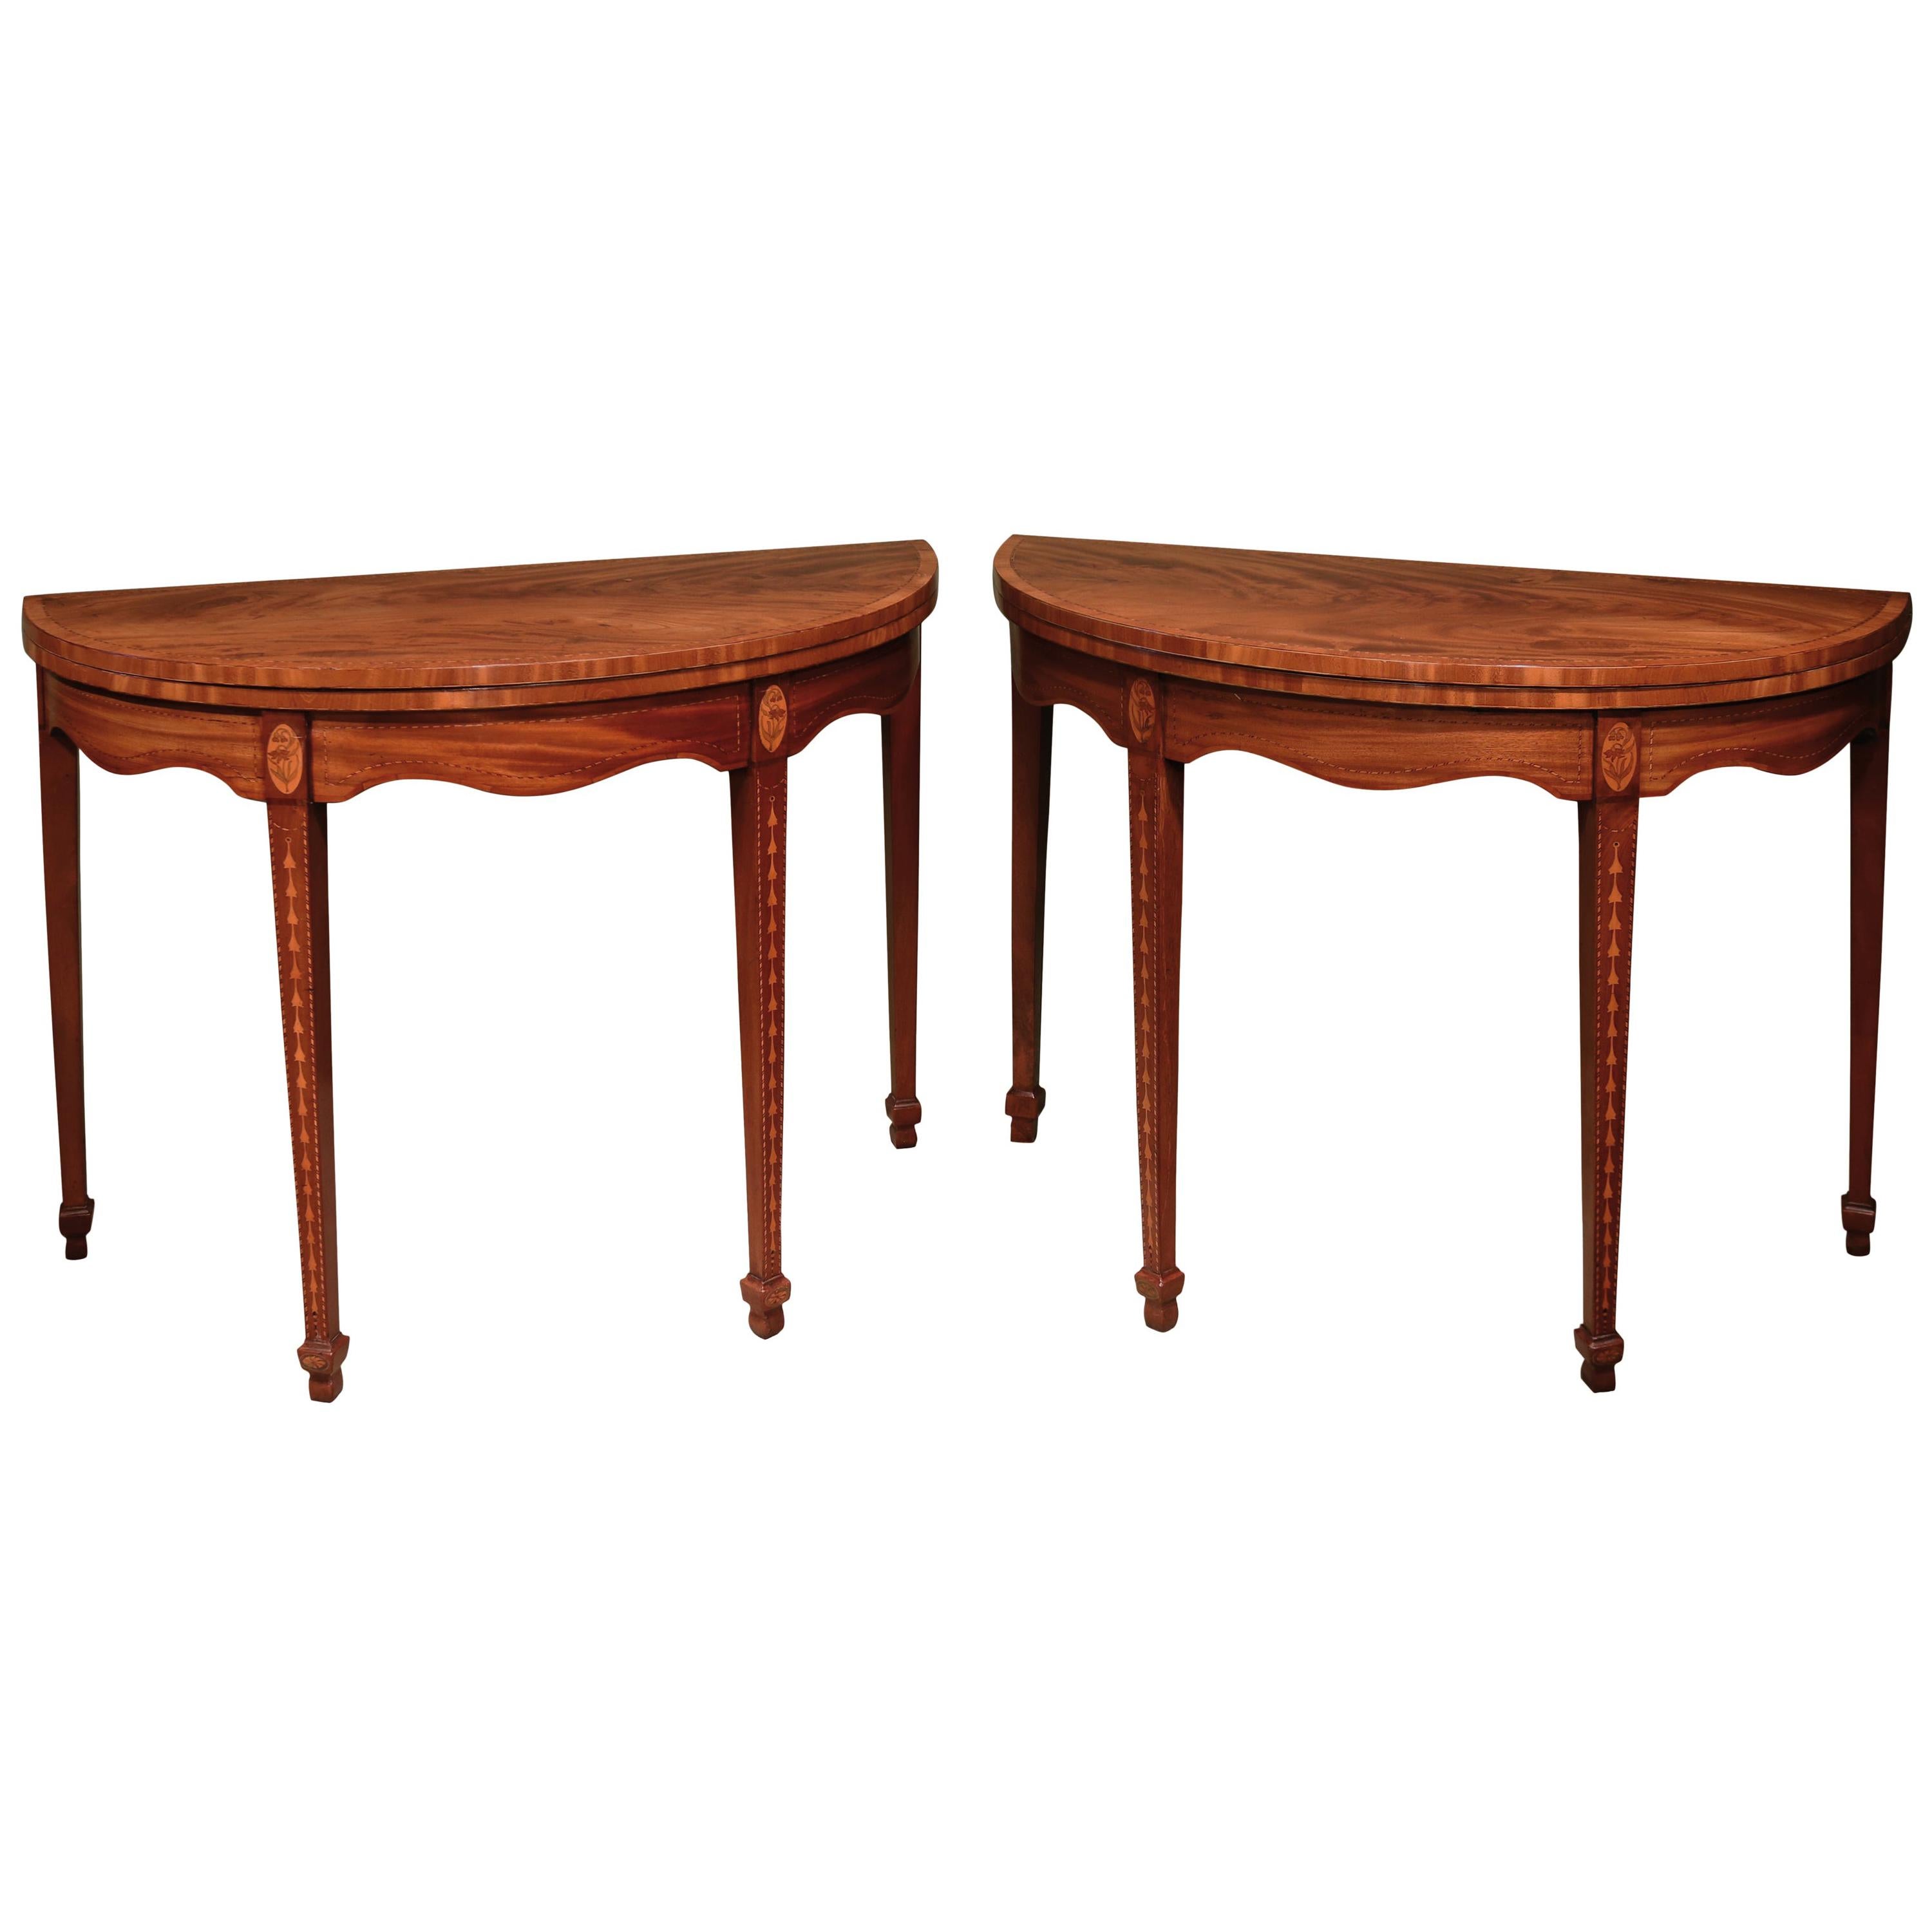 Pair of Late 18th Century Sheraton Period Figured Mahogany Card Tables For Sale